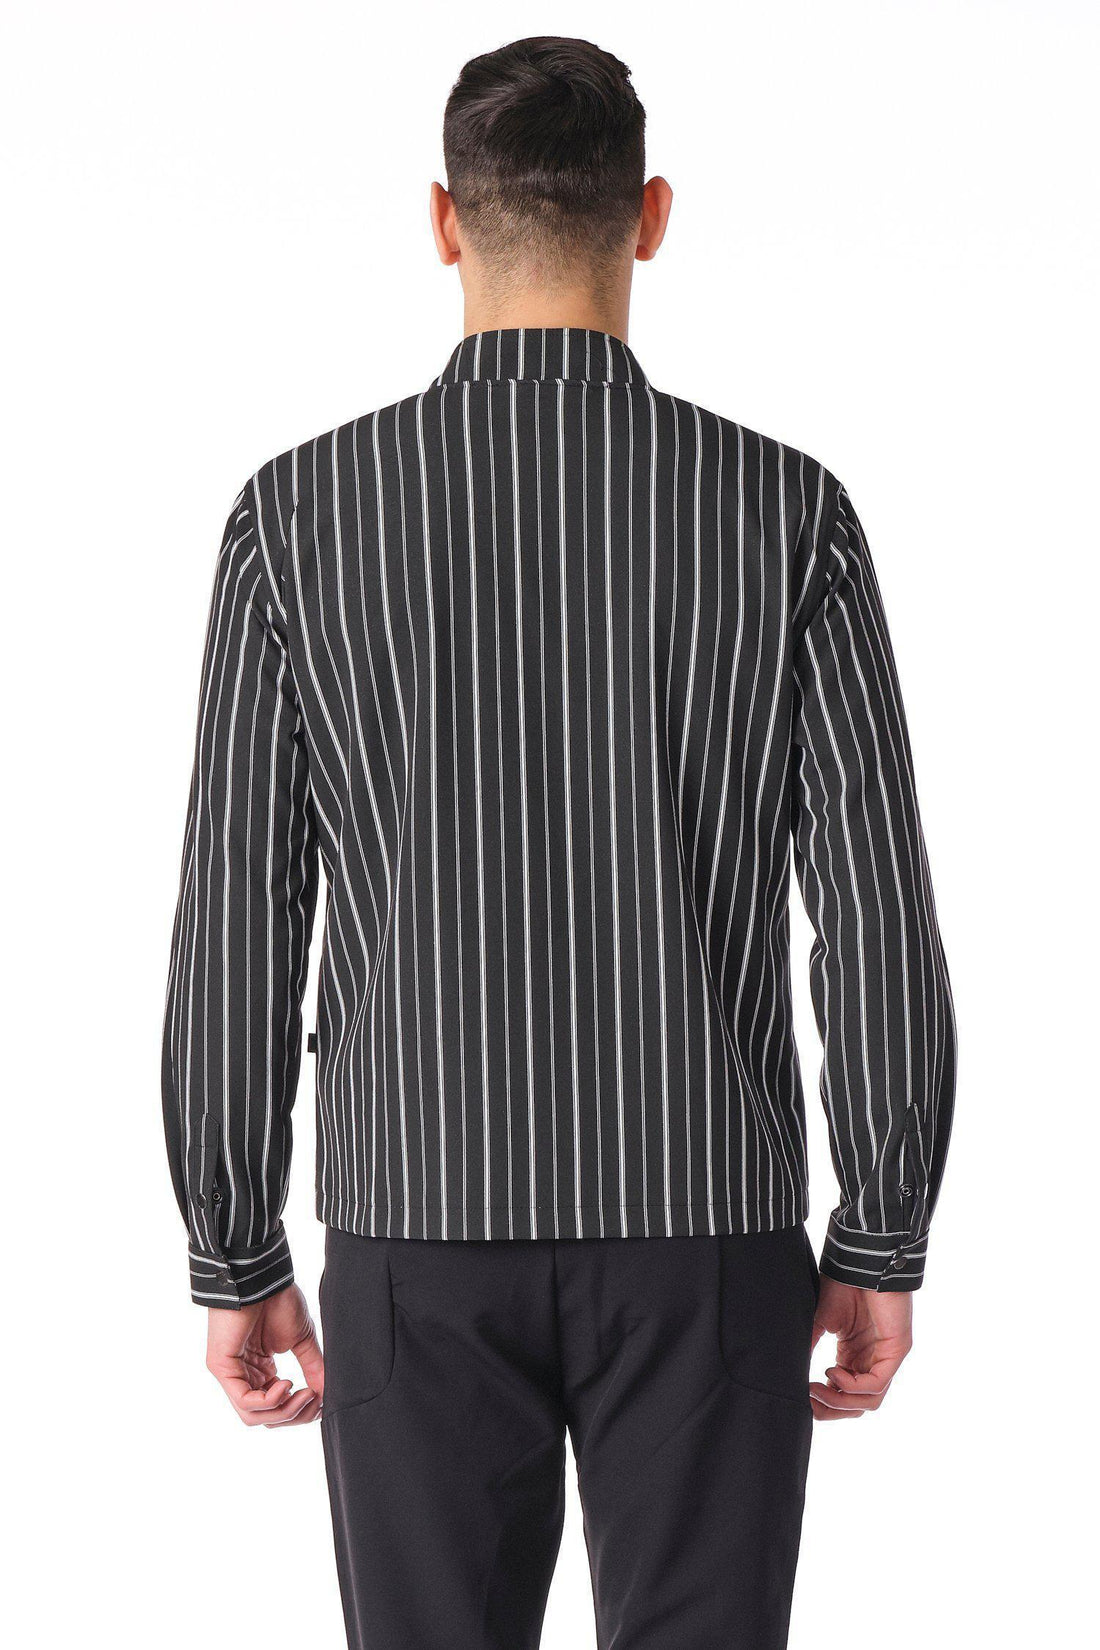 City Zip Shell Jacket - Striped - Ron Tomson